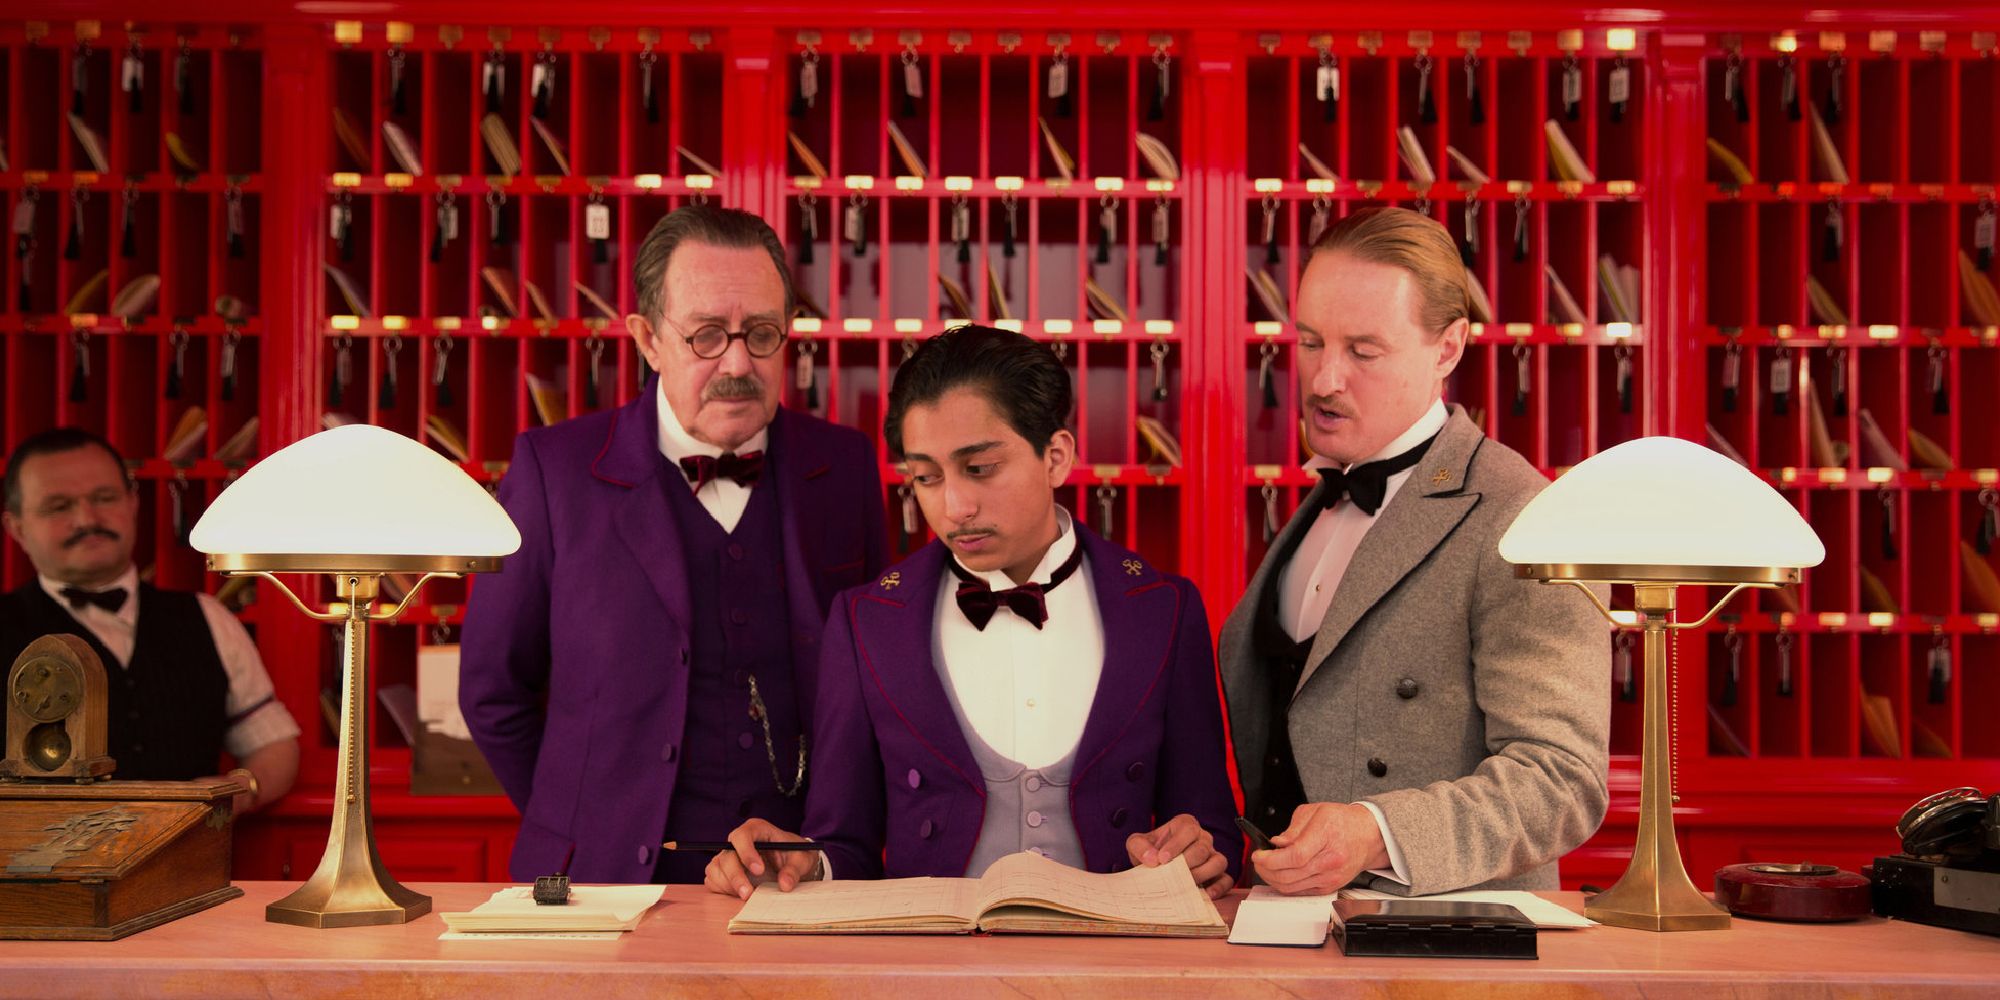 Owen Wilson and Tony Revolori looking to the side in The Grand Budapest Hotel